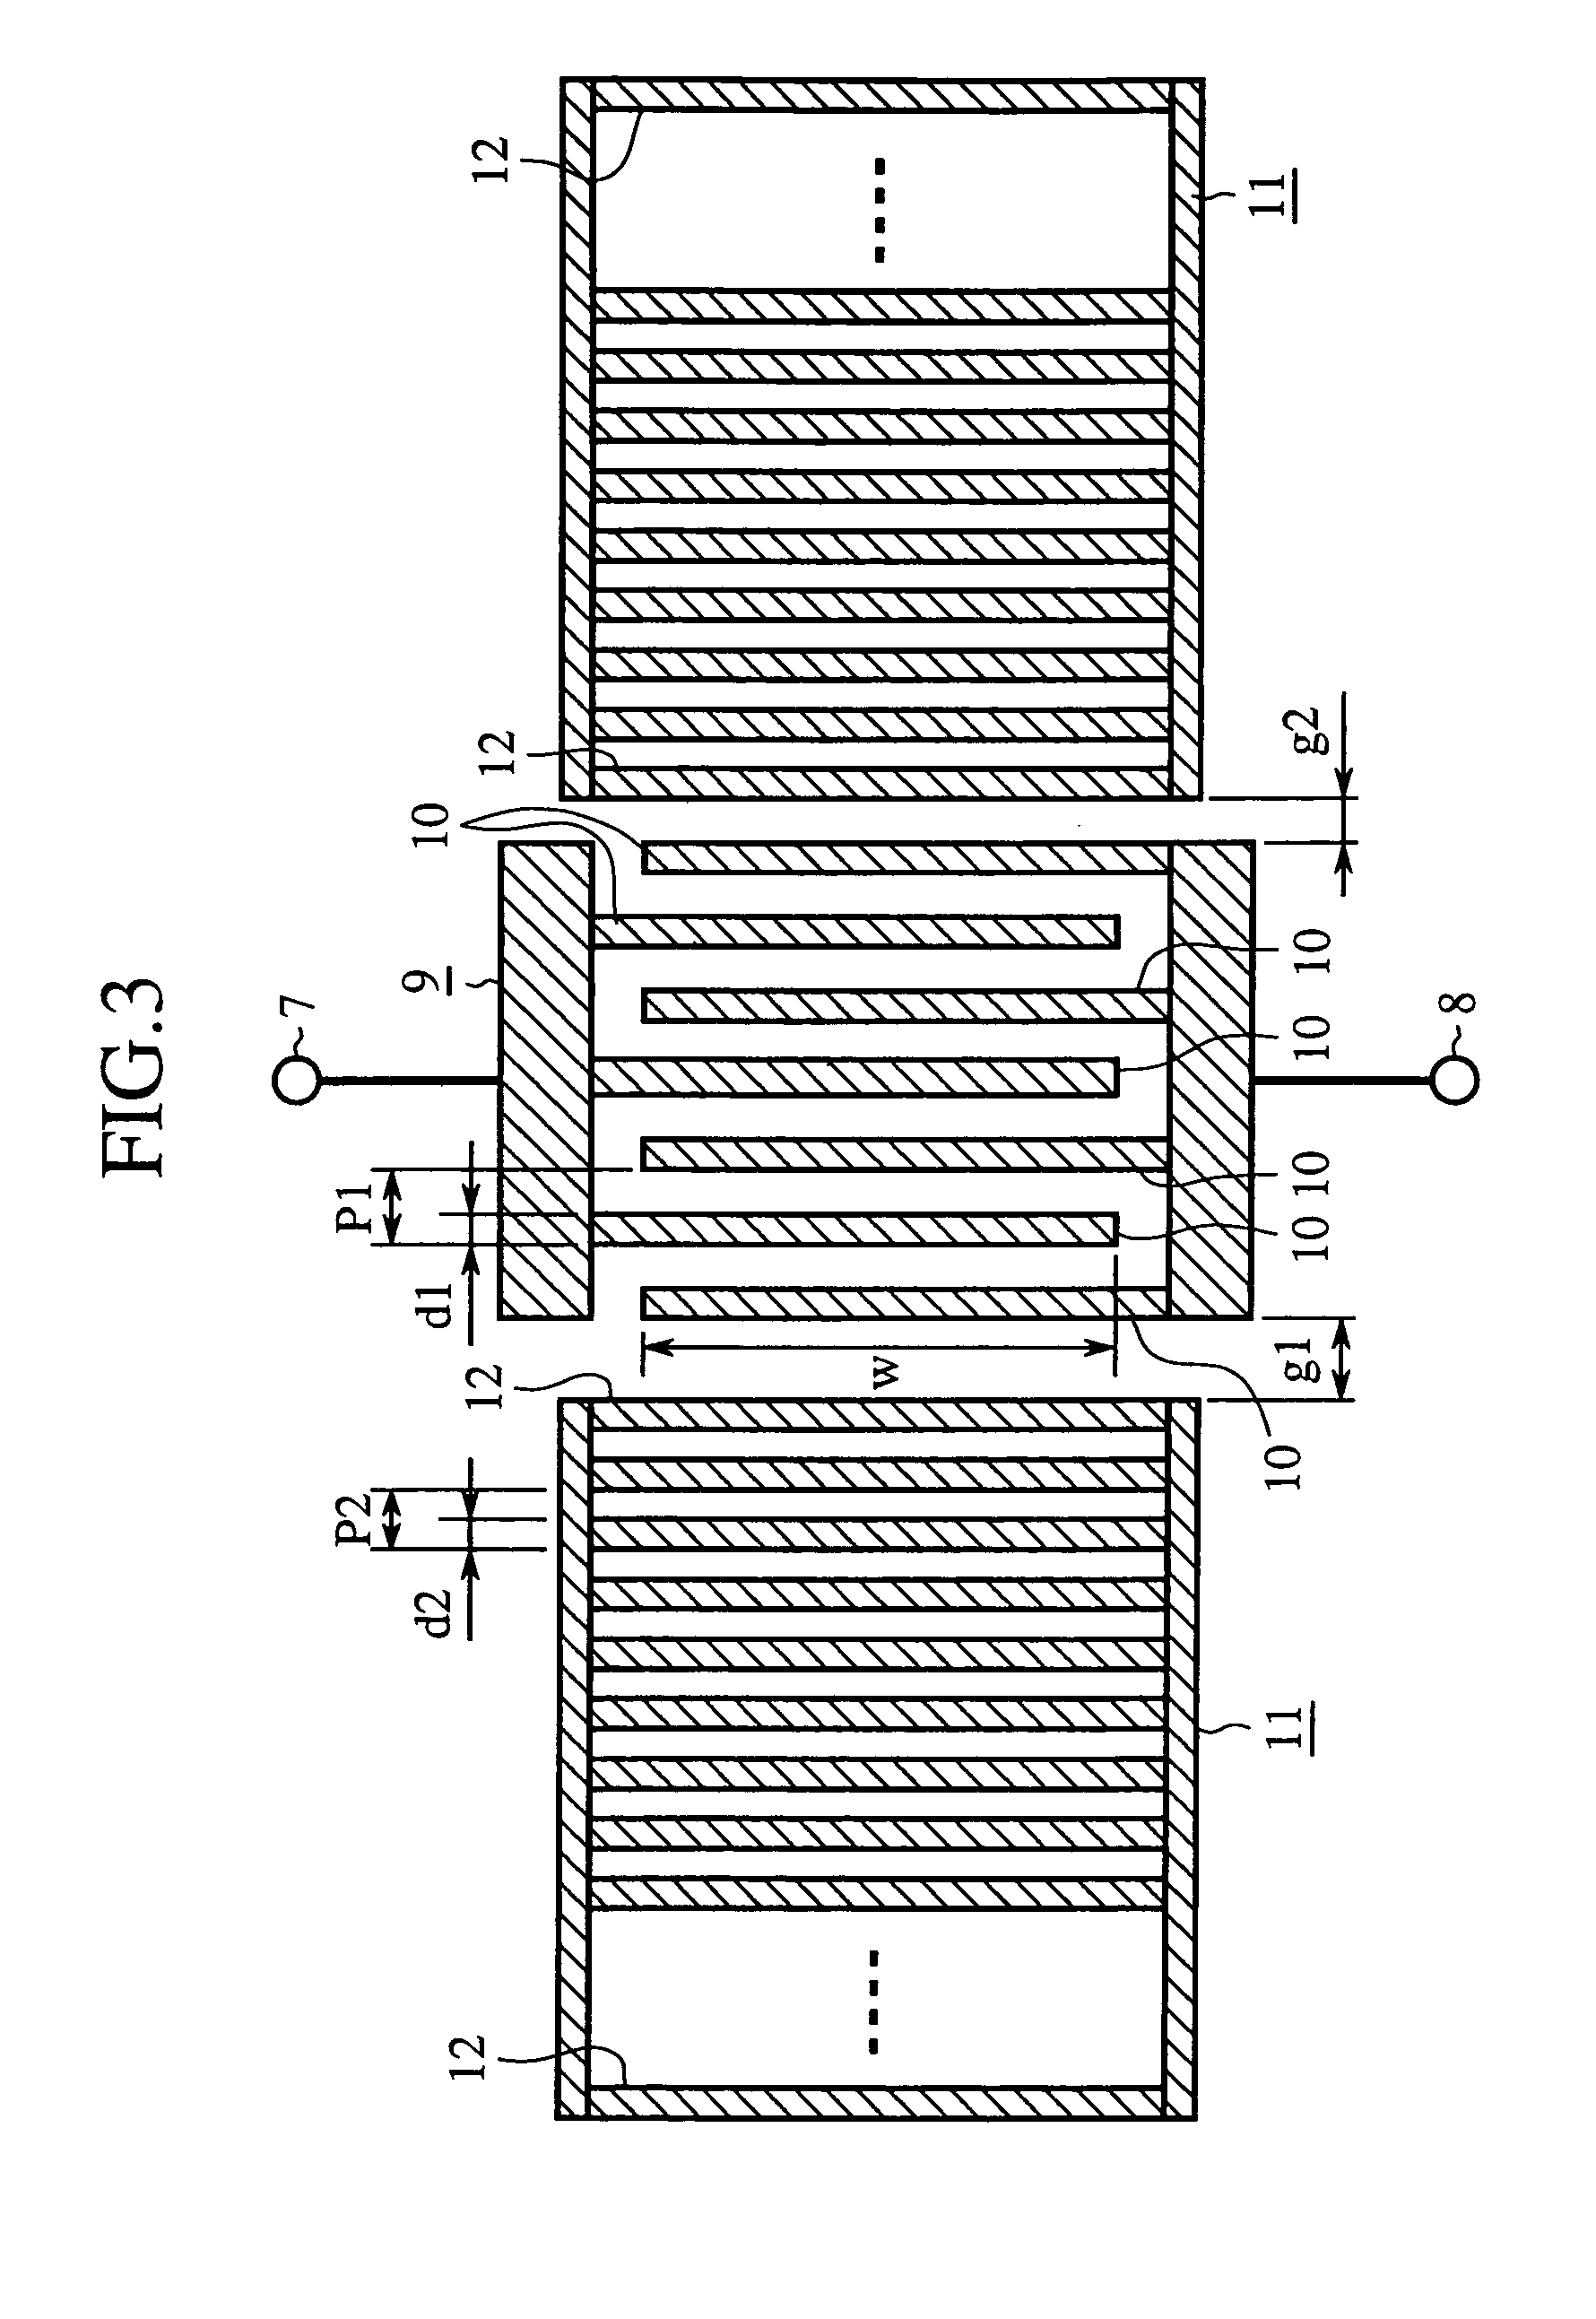 Filter circuit with series and parallel elements